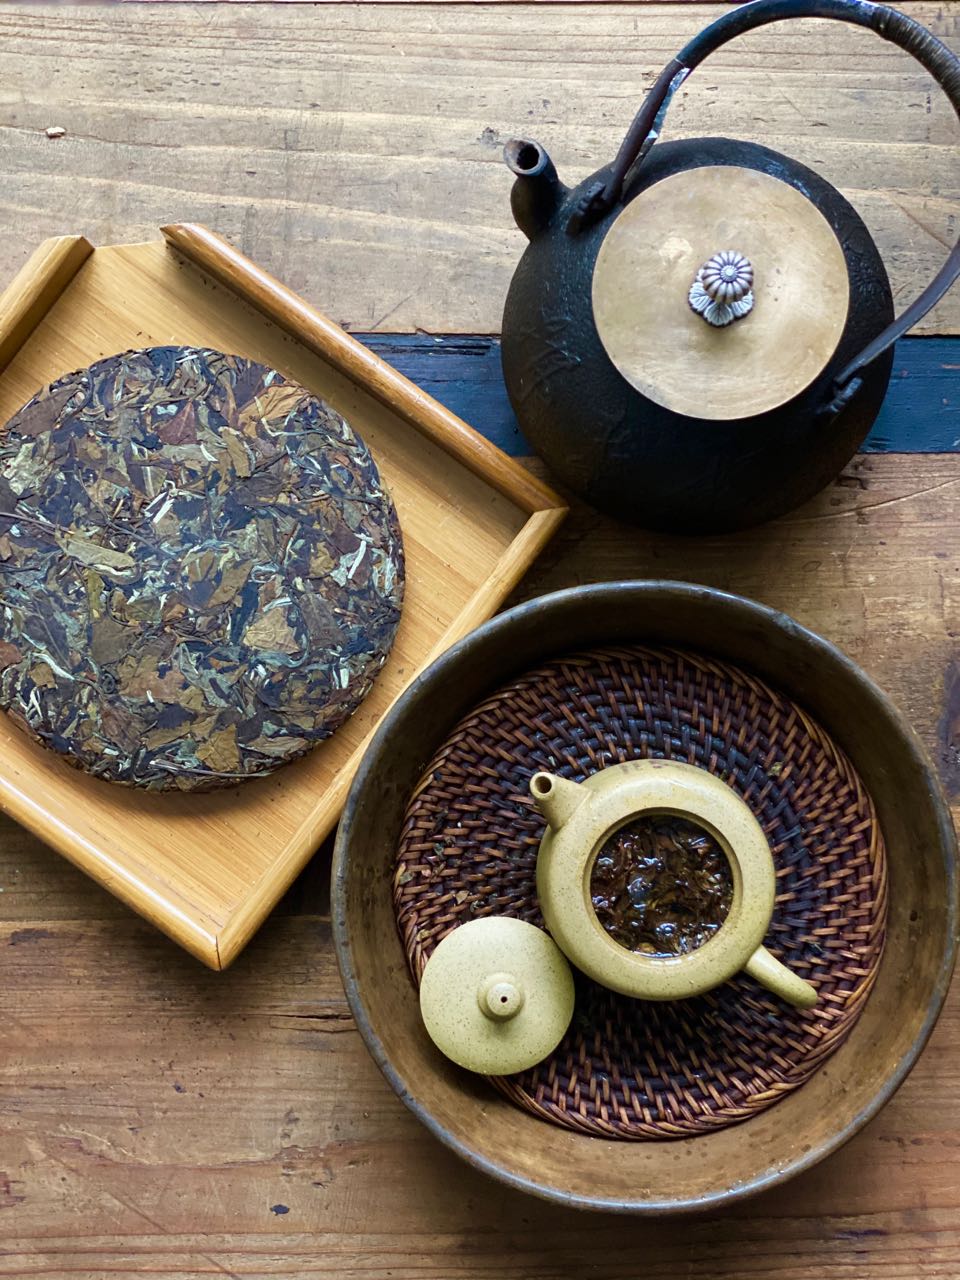 Our organic Harvest Moon 2016 Old Tree White Tea is a particularly sweet white tea cake from the old tree forest in Huazhu Liangzi. It offers beautiful notes of baked fruit, mulled wine and vanilla, with a long and lingering sweetness.